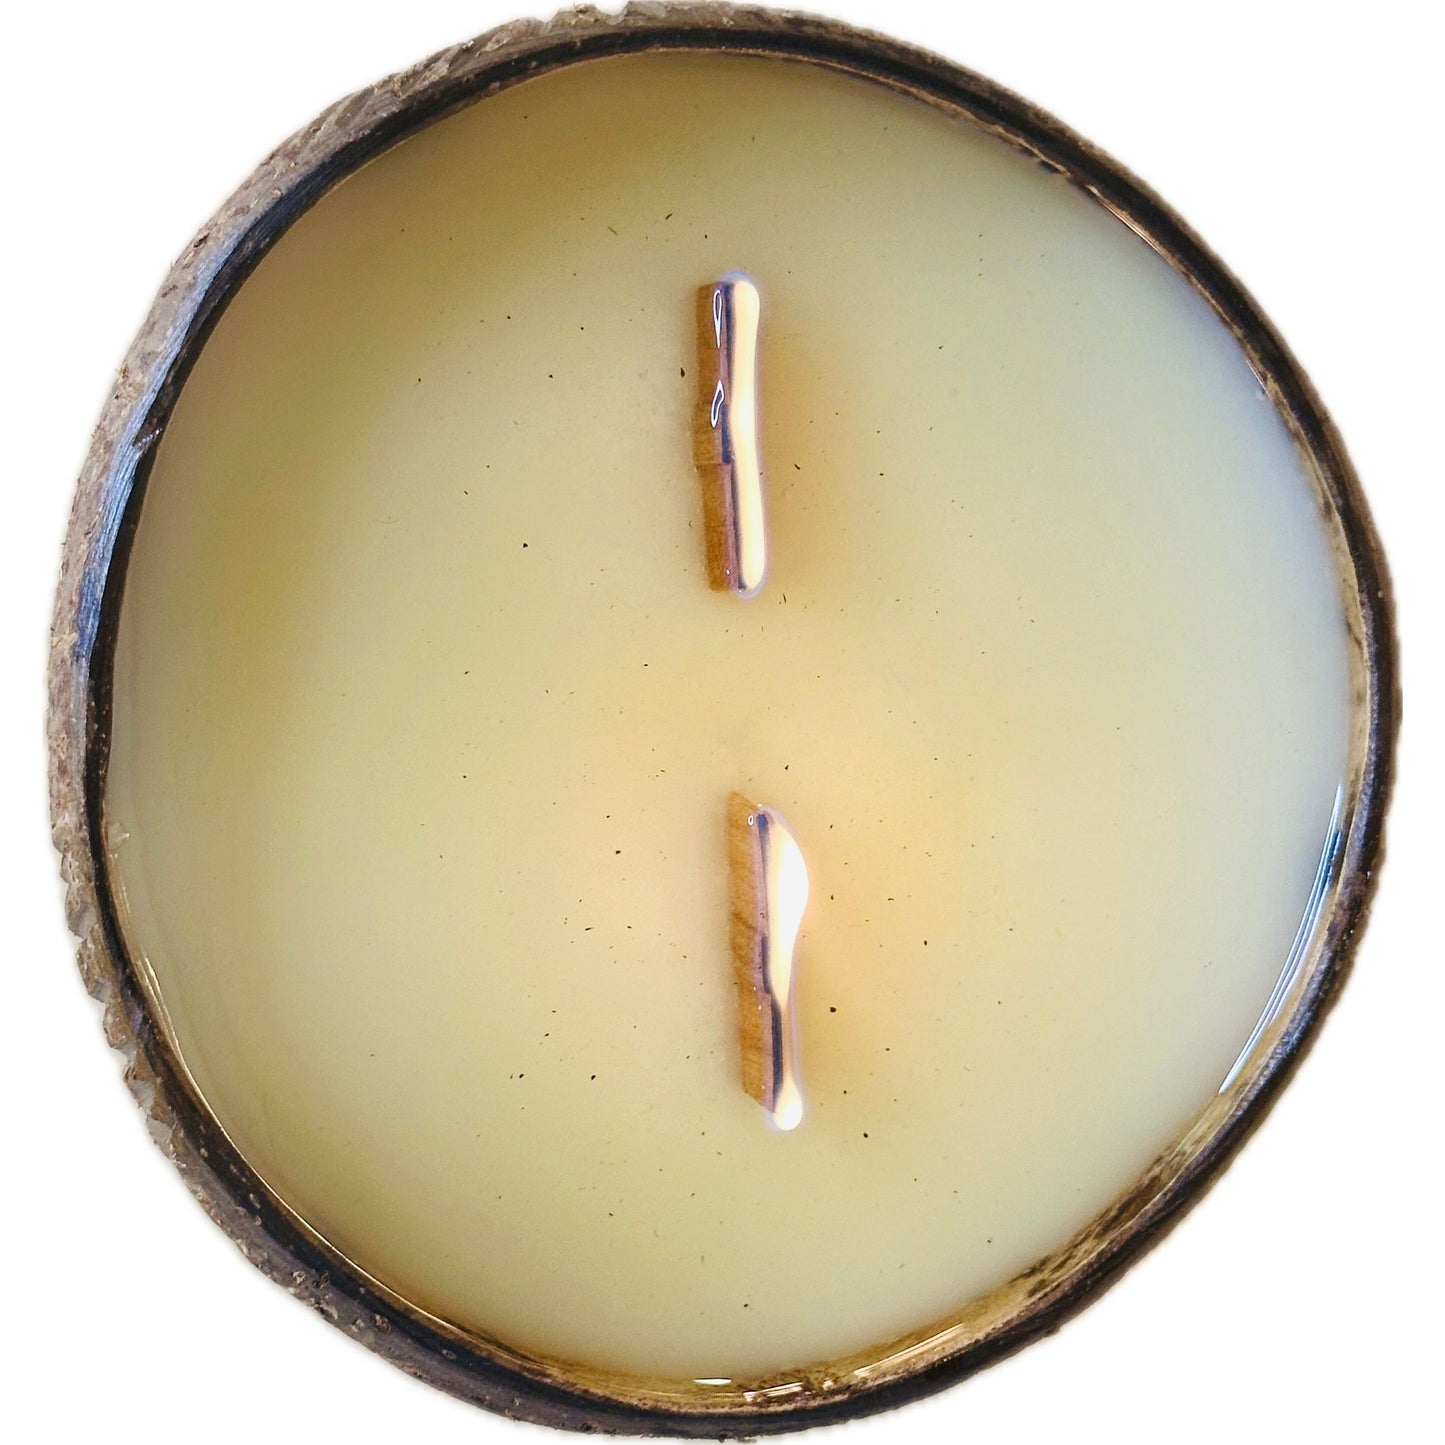 STAYCATION Coconut Bowl Candle